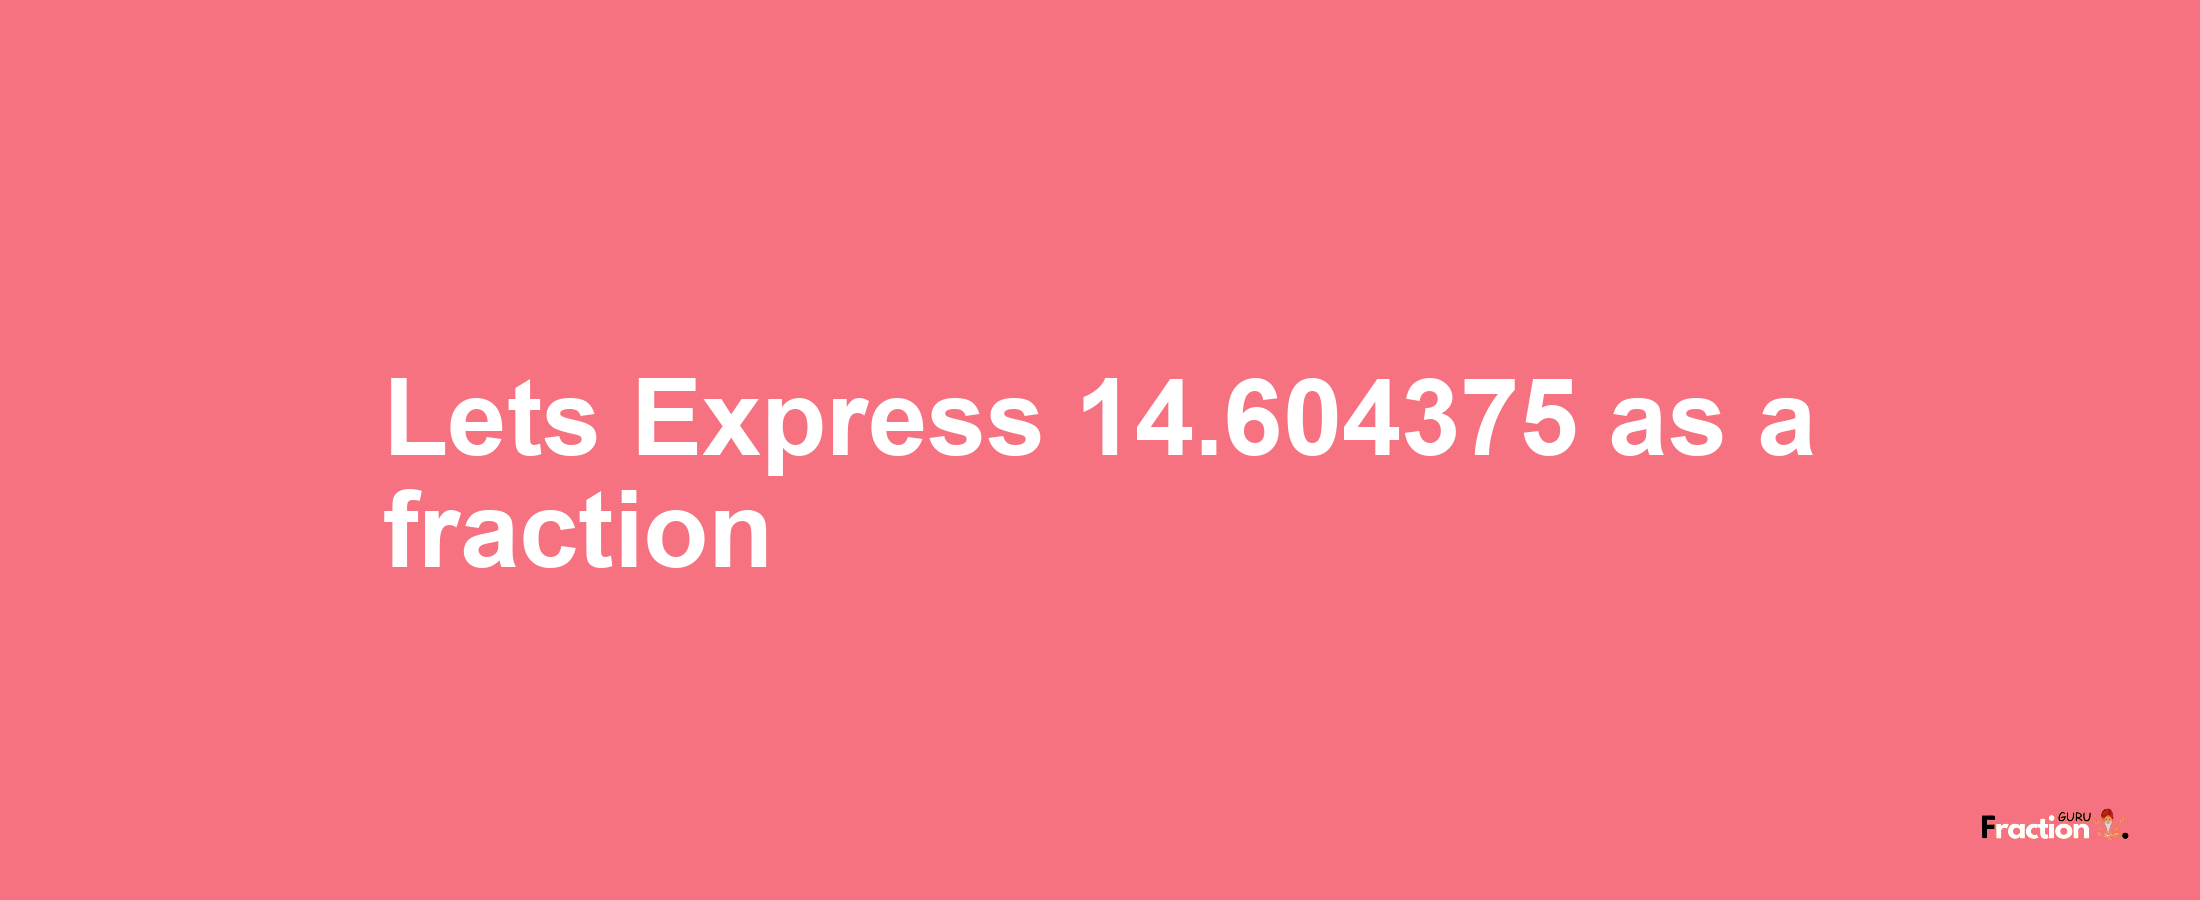 Lets Express 14.604375 as afraction